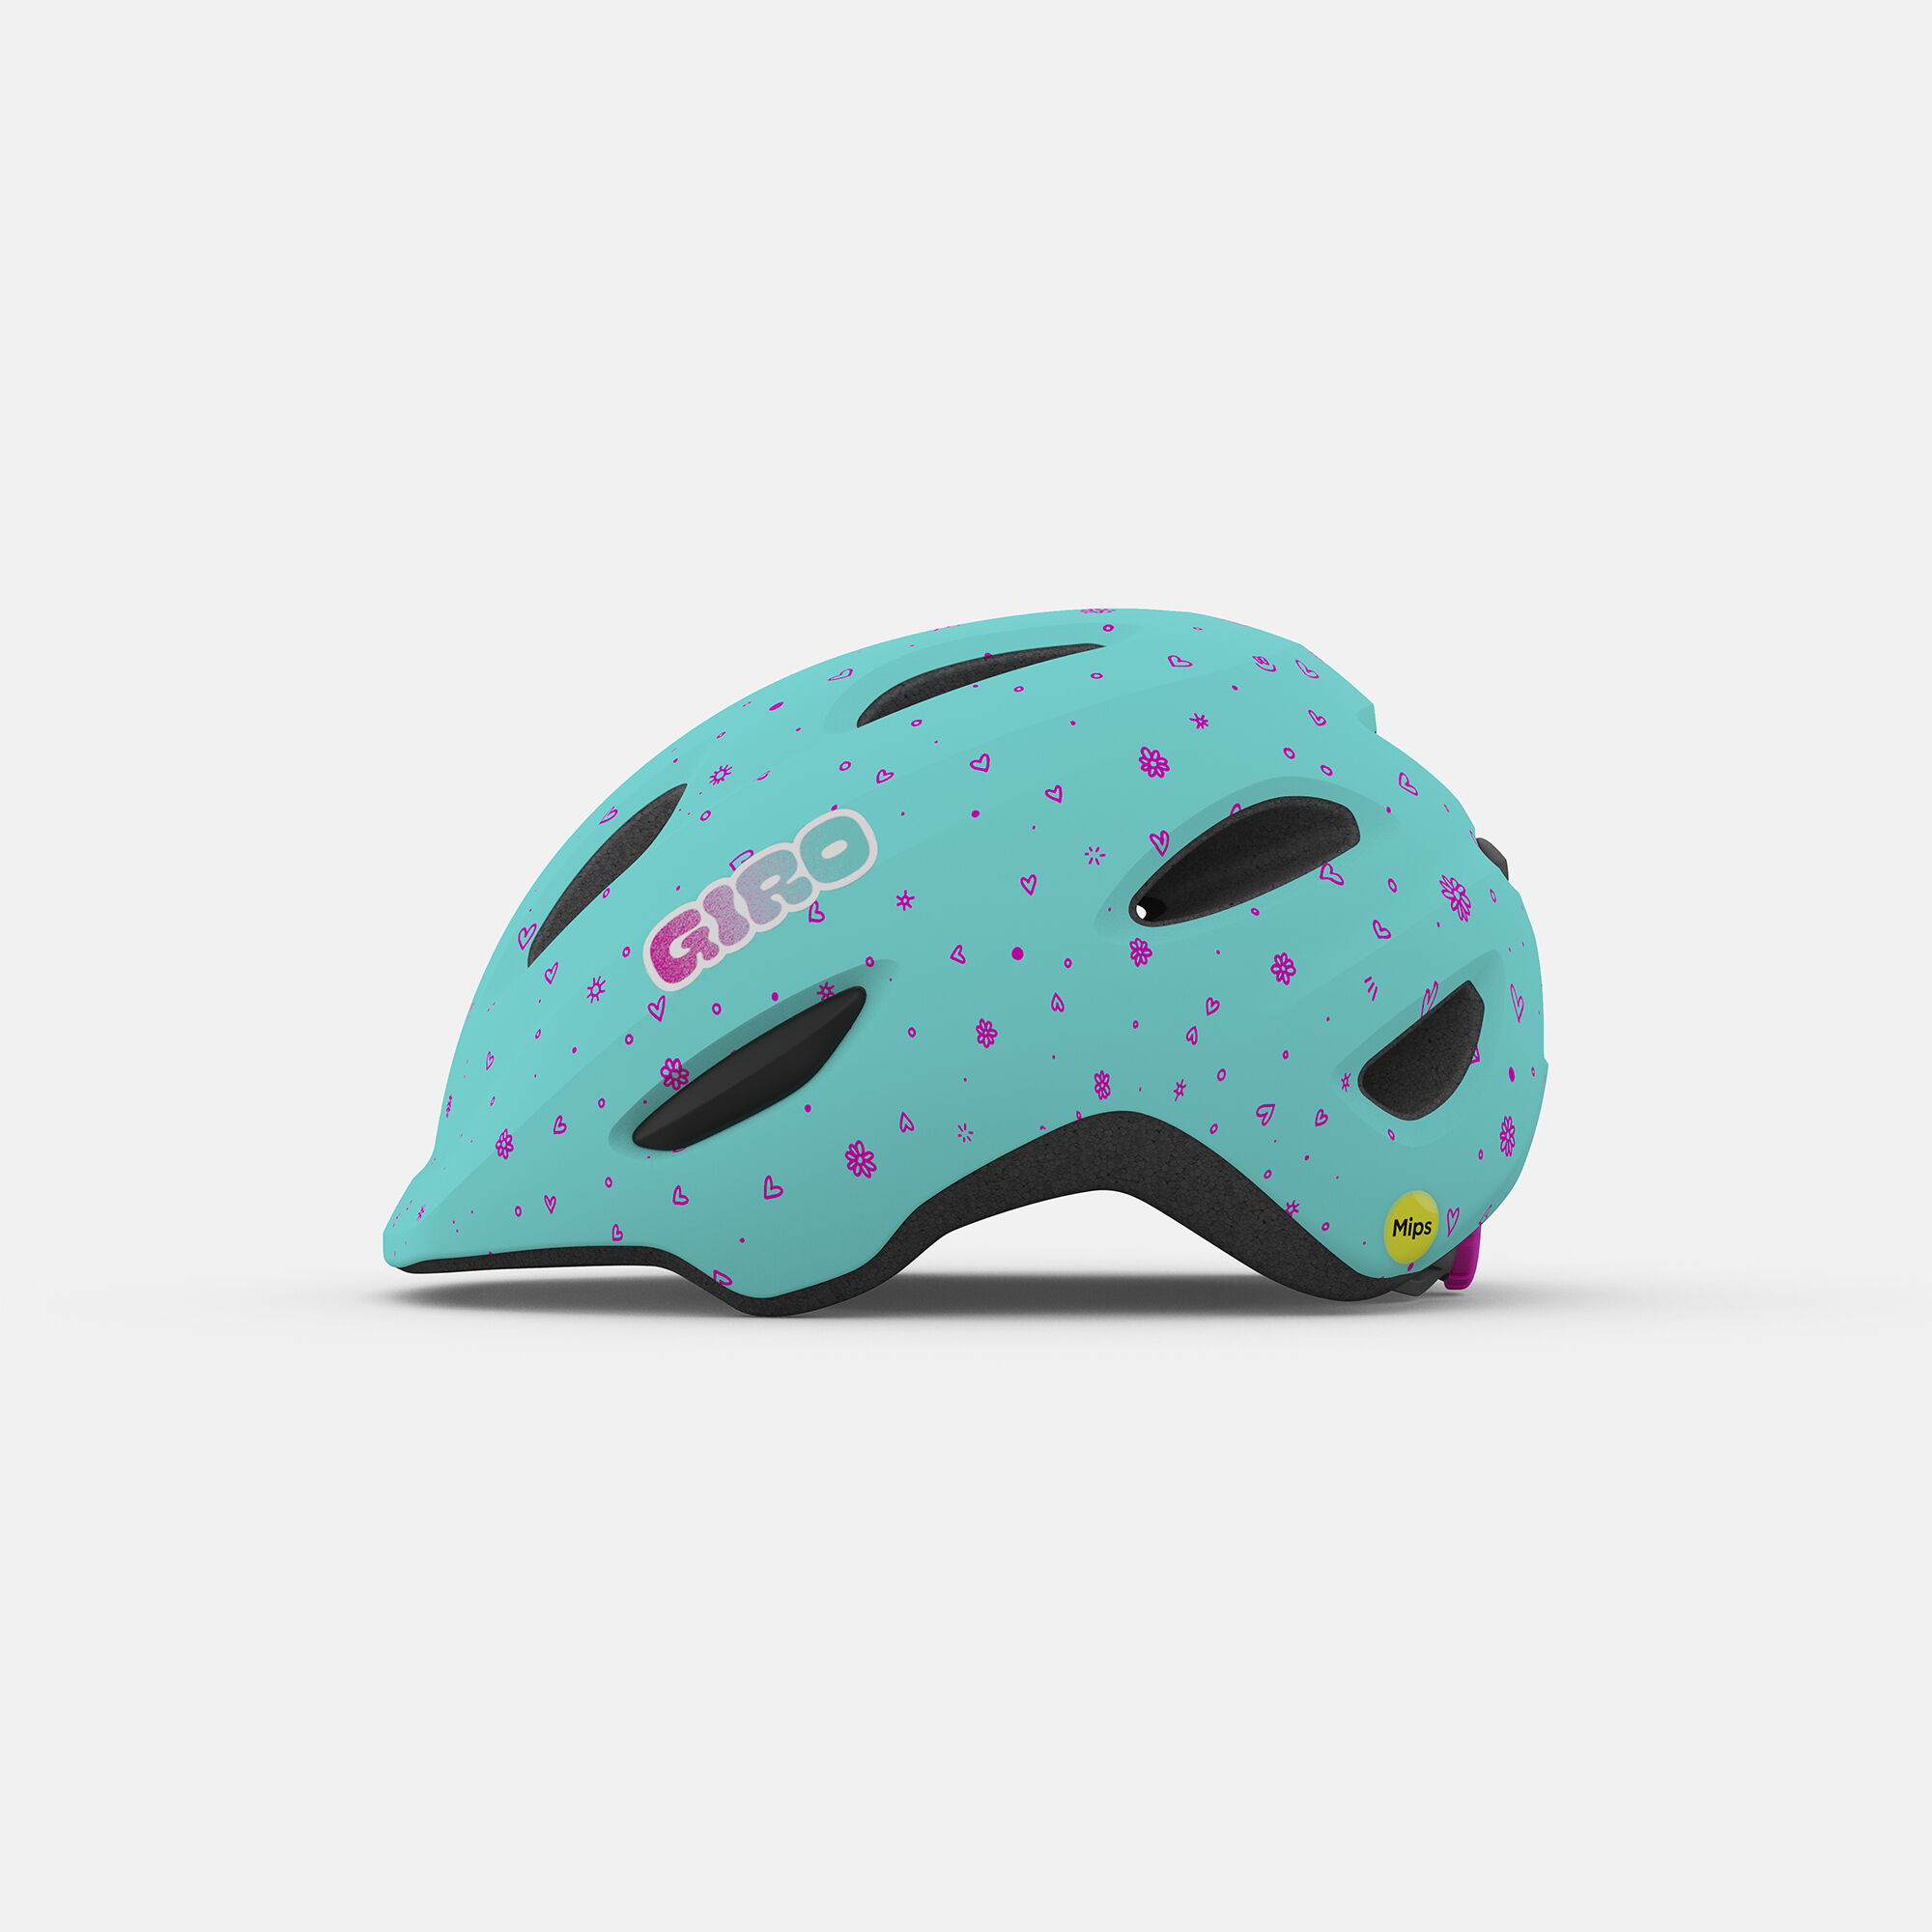 DIF. COLORS & SIZES AVAILABLE GIRO SCAMP ROAD CYCLING KIDS HELMET !! 